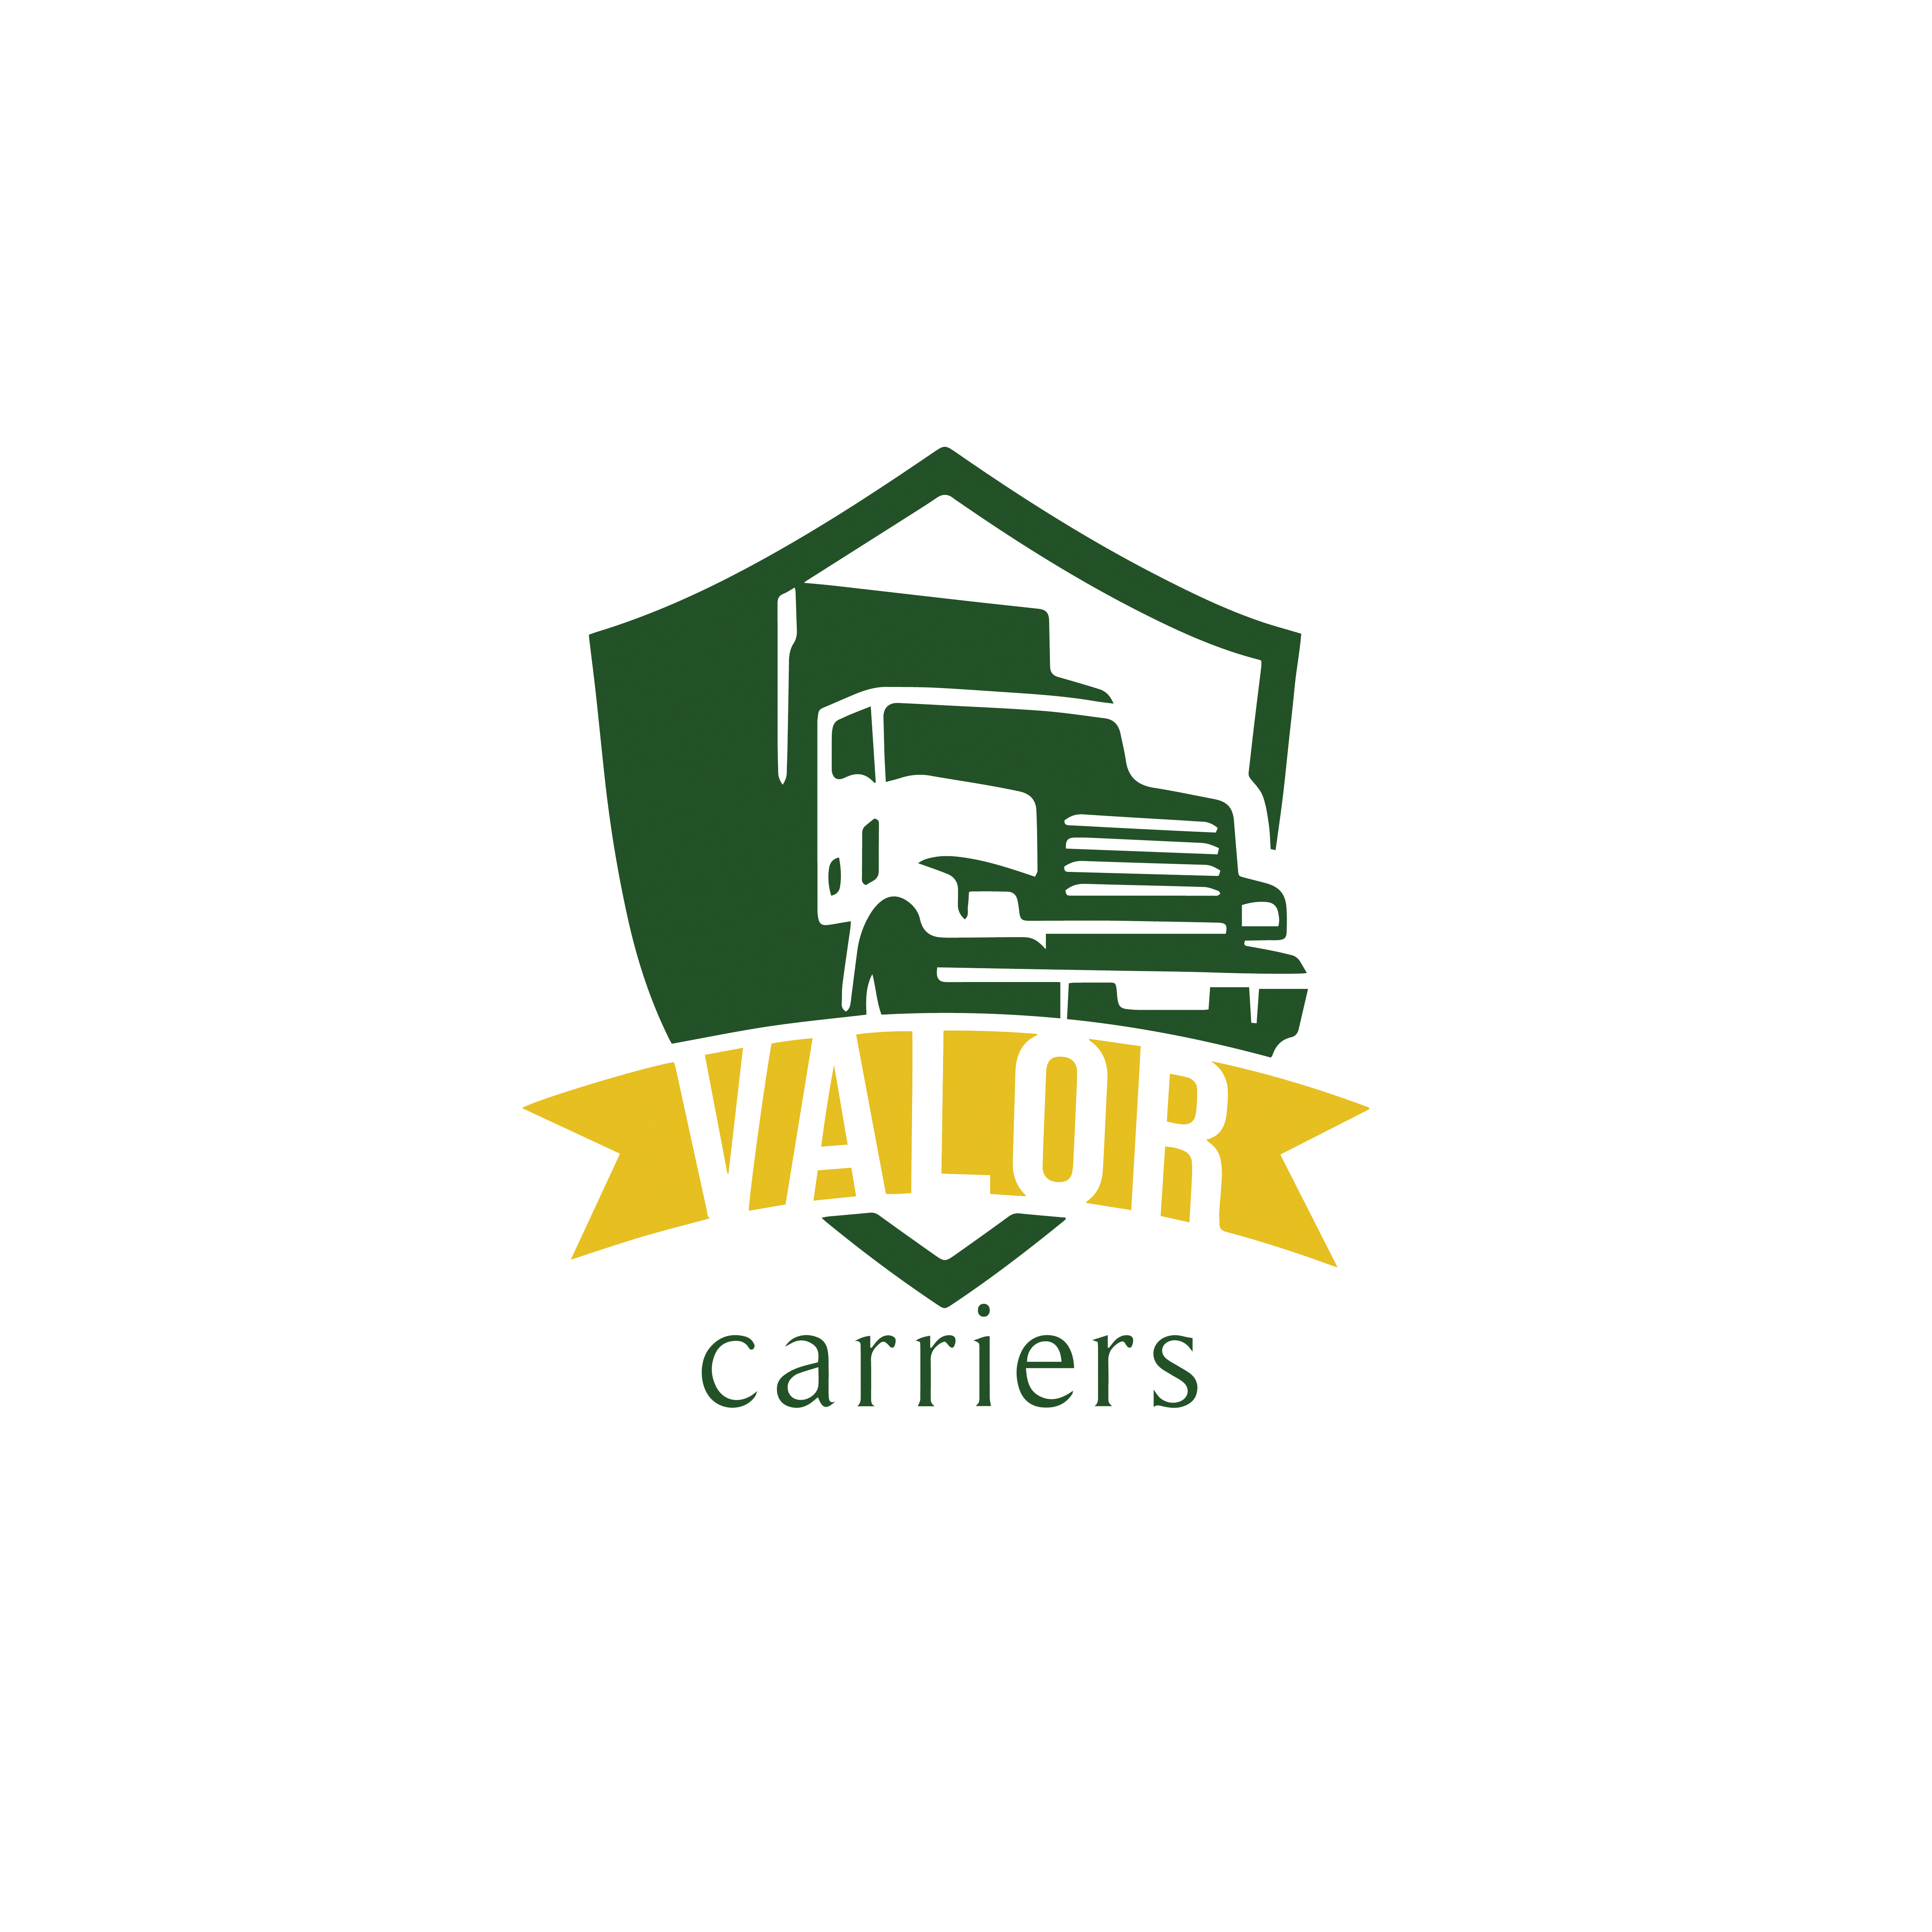 Valor Carriers